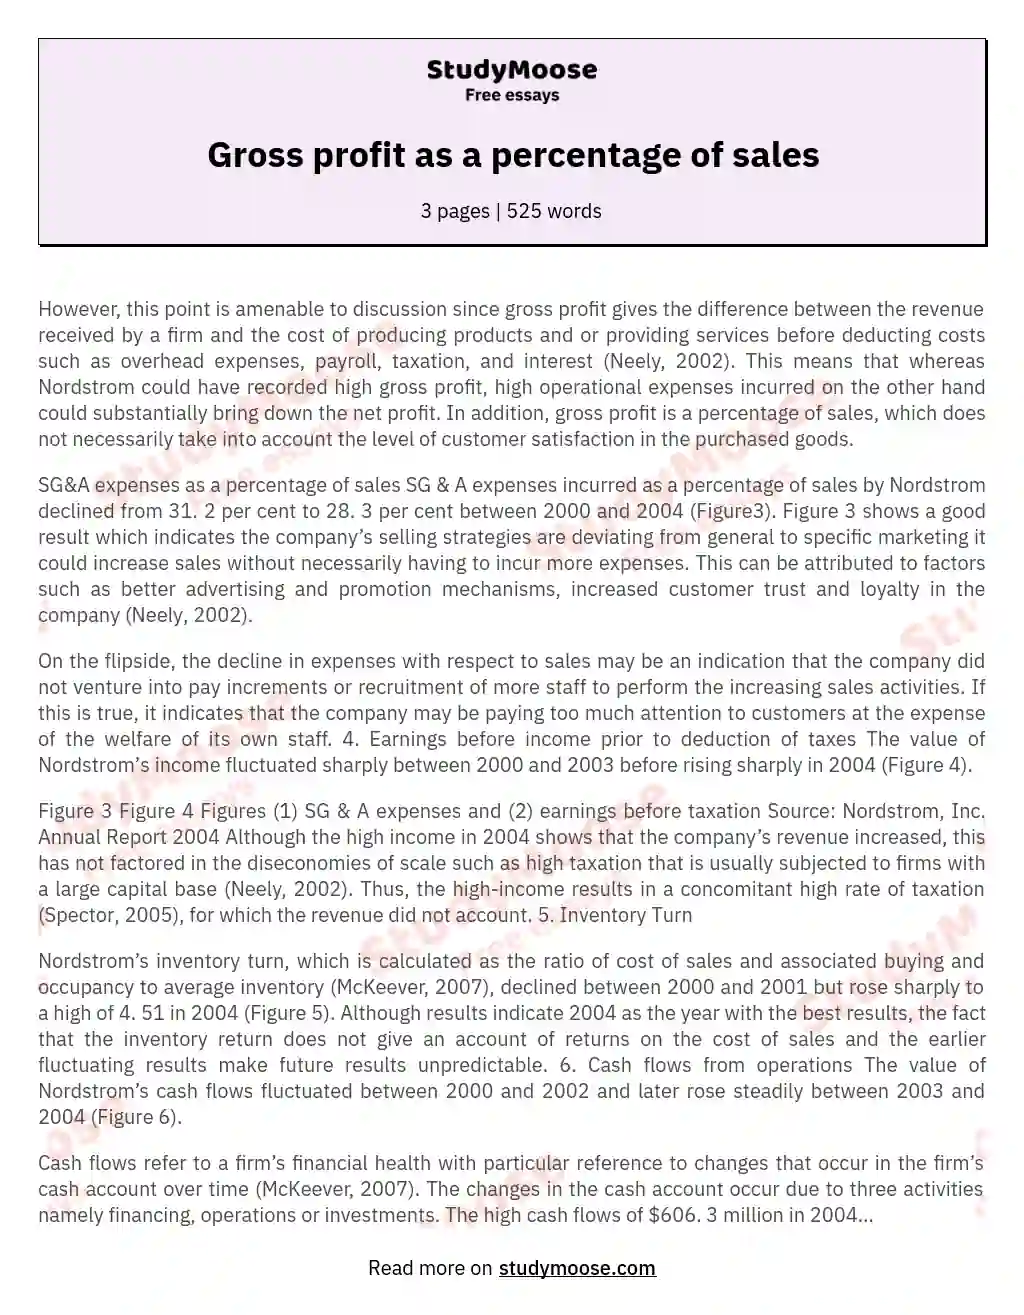 Gross profit as a percentage of sales